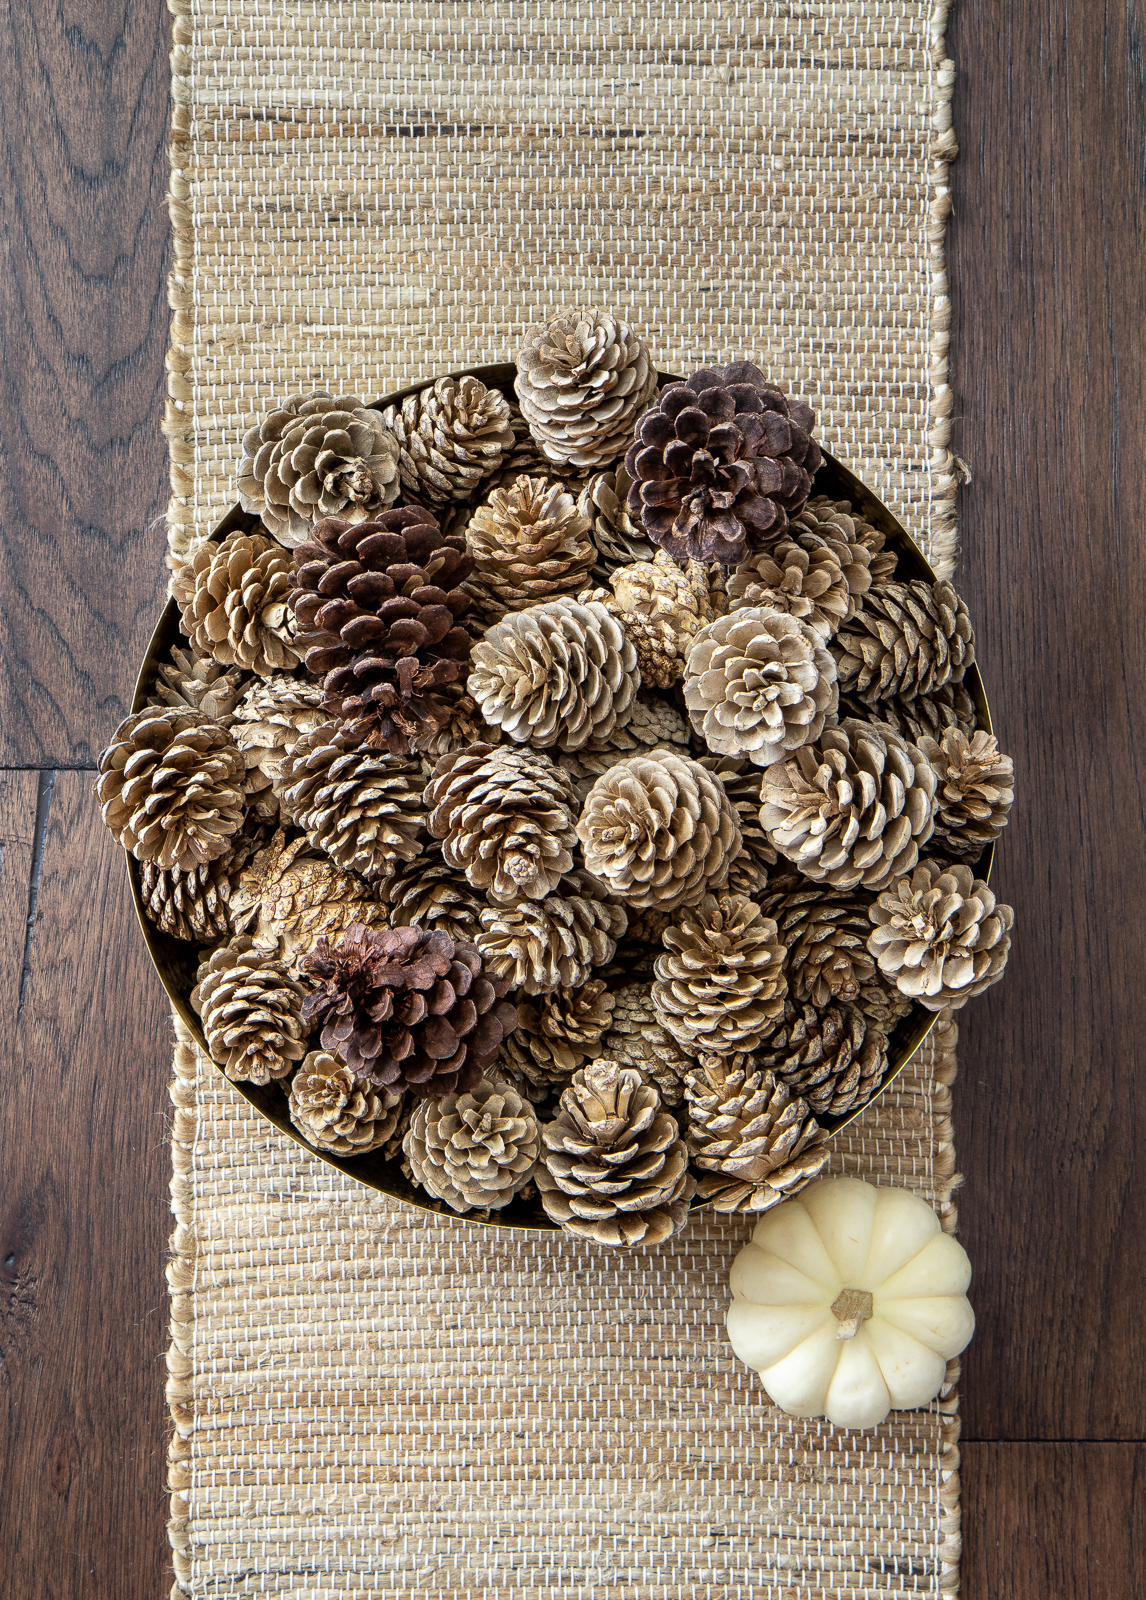 🧶🌲🧶Bleaching pinecones for crafts. Do feel free to save and share f, Craft